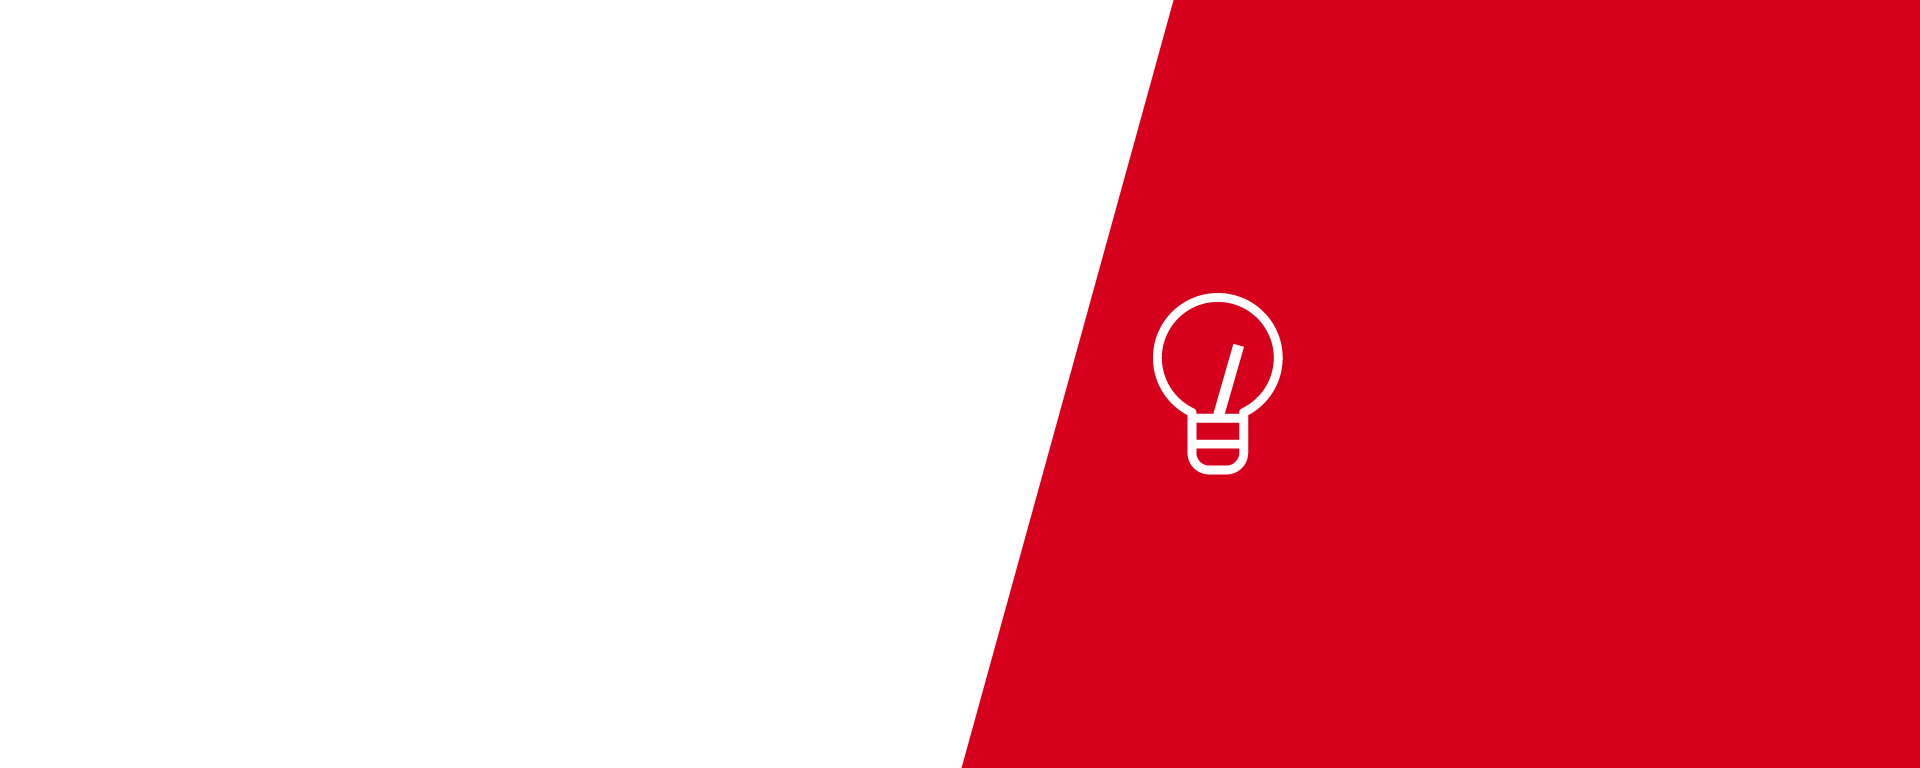 Half white and half red with a lightbulb icon.